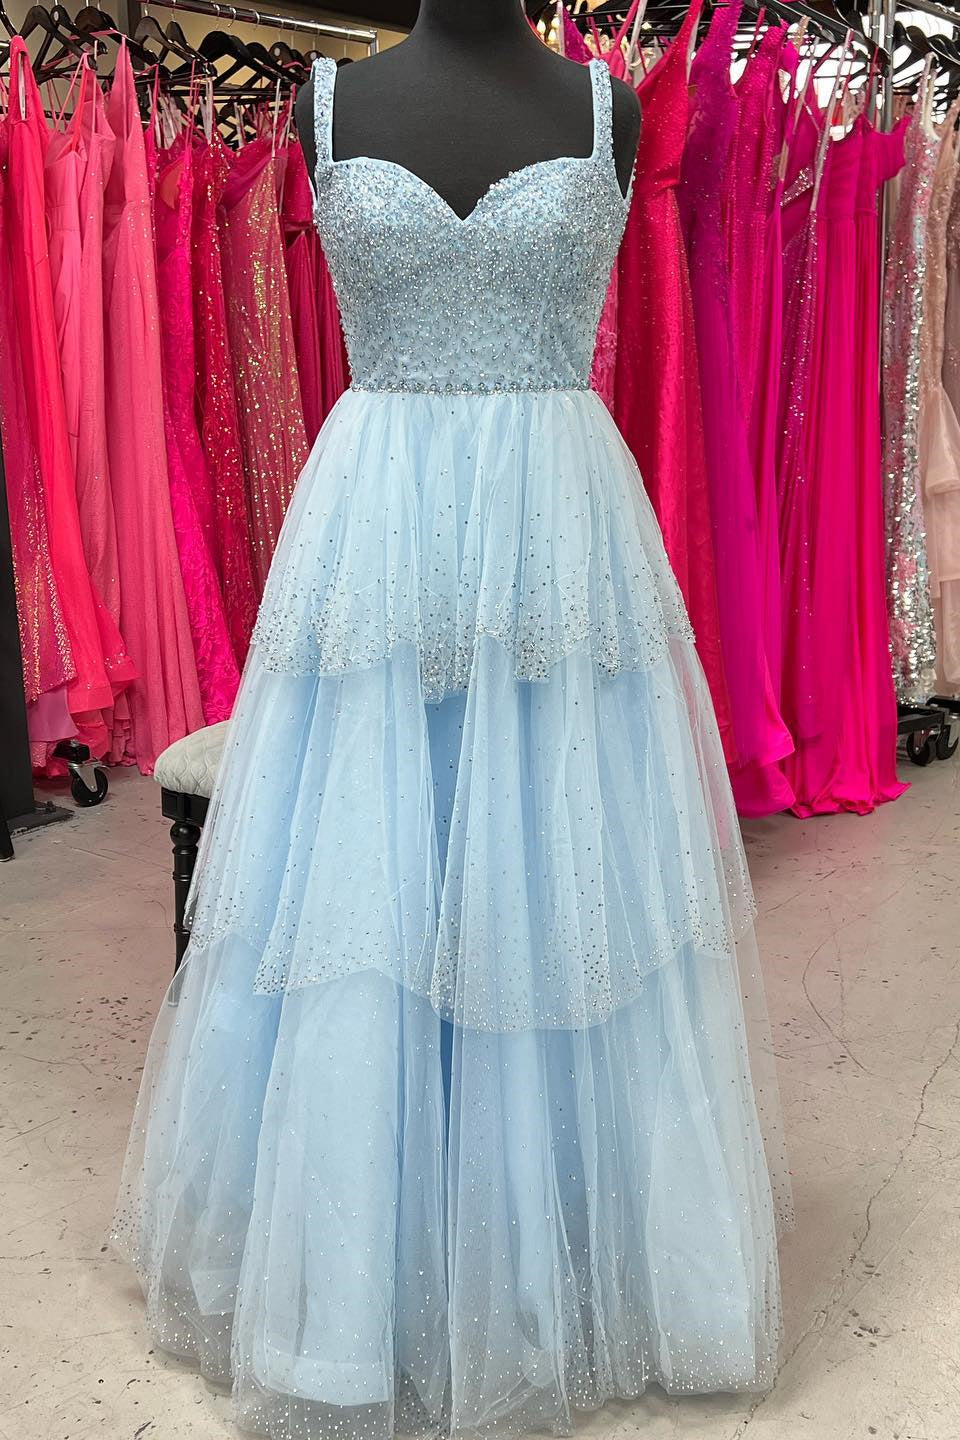 Bridesmaids Dresses Floral, Light Blue Sweetheart Beaded Straps Multi-Layers Long Prom Dress